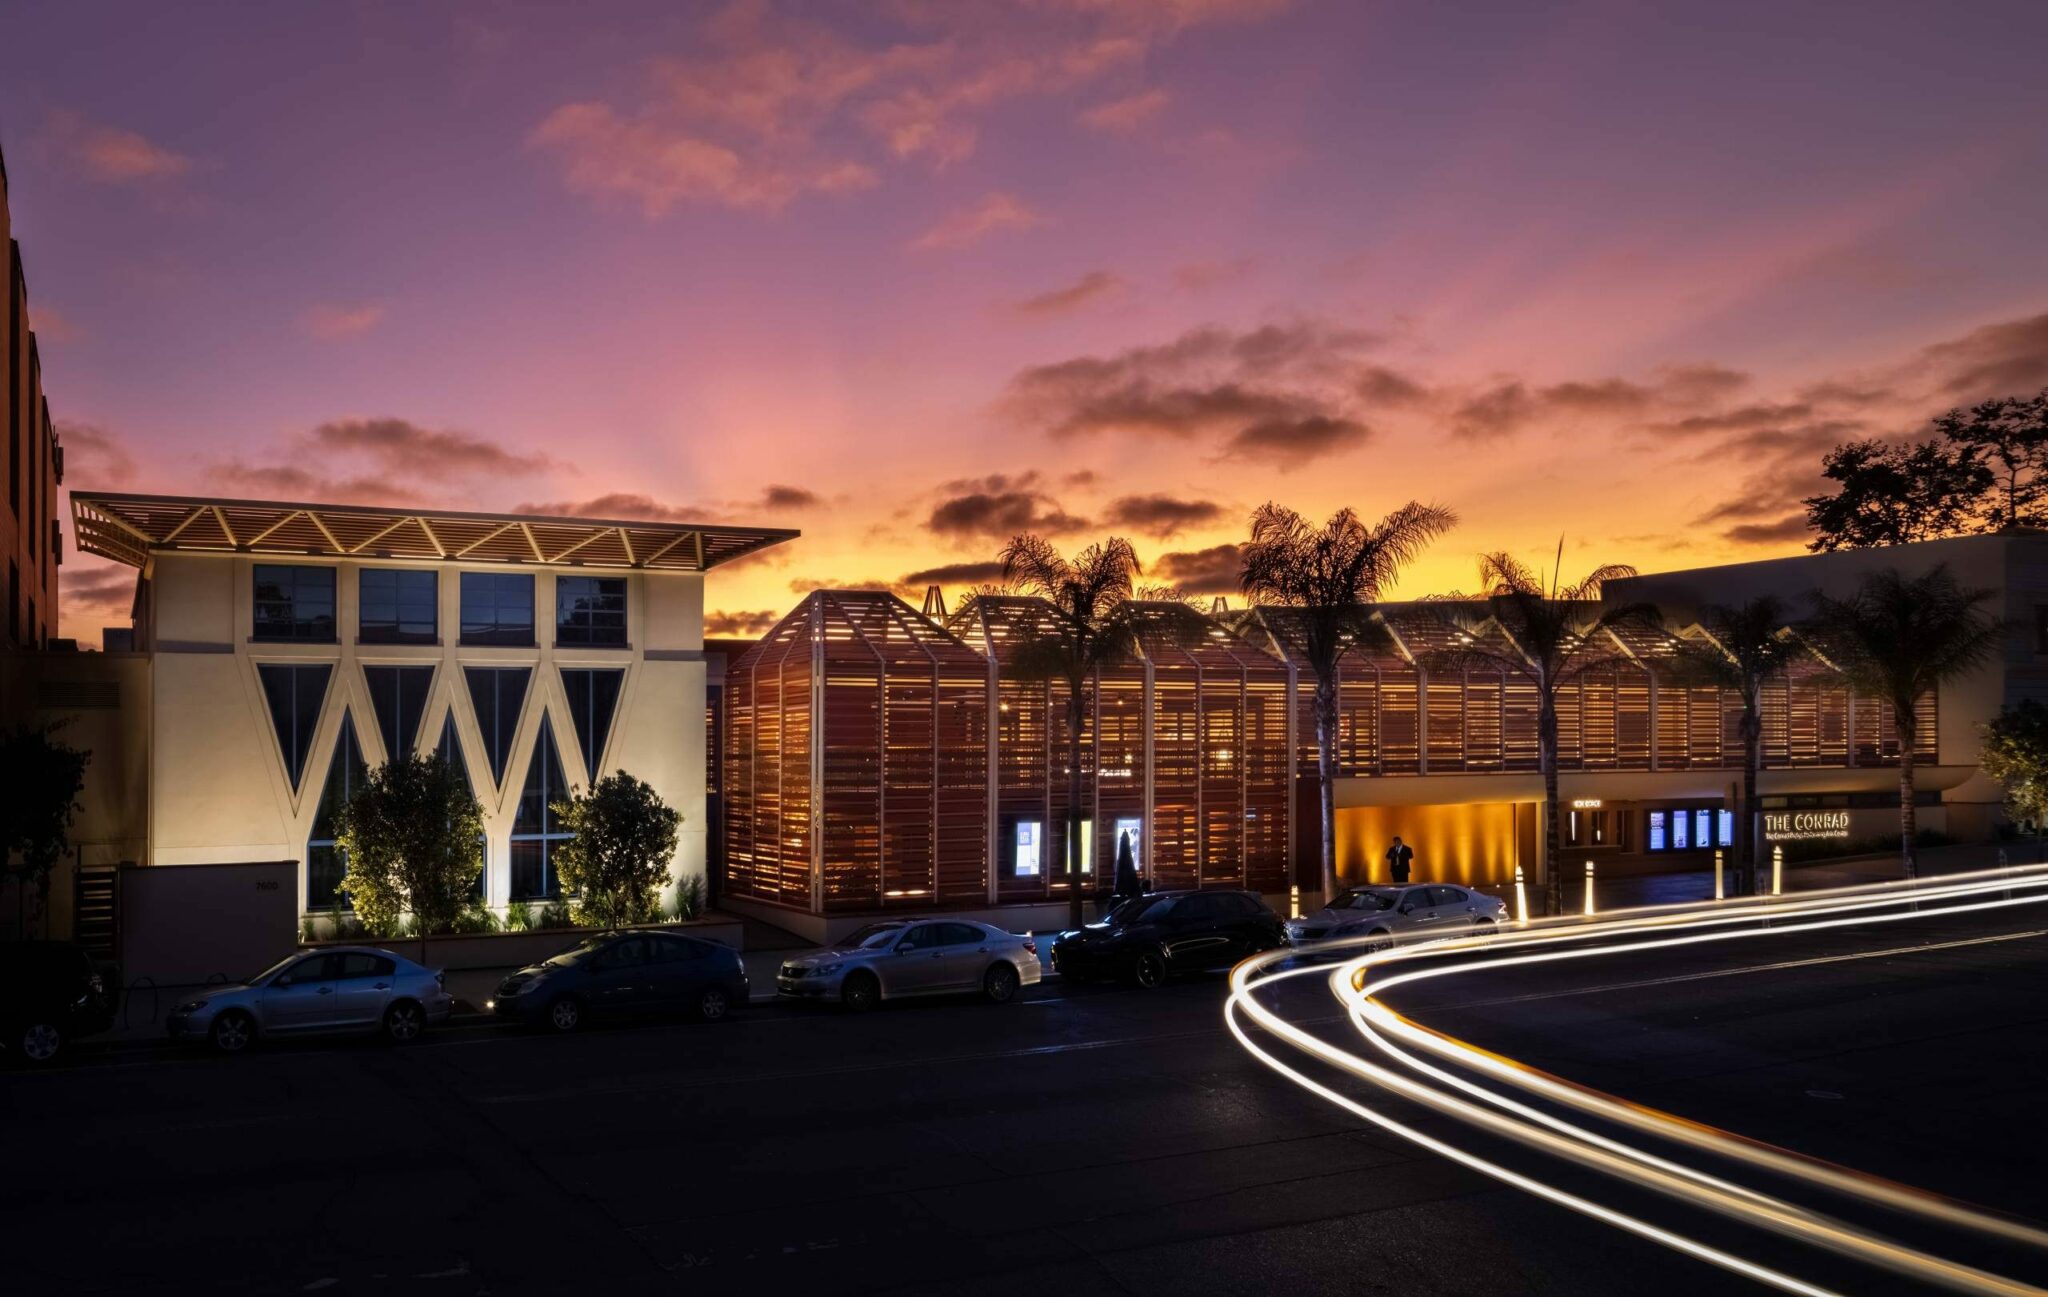 The Conrad performing arts center building at sunset,yellow pink and purple sky with clouds and palm trees. event site for the blue water film festival.